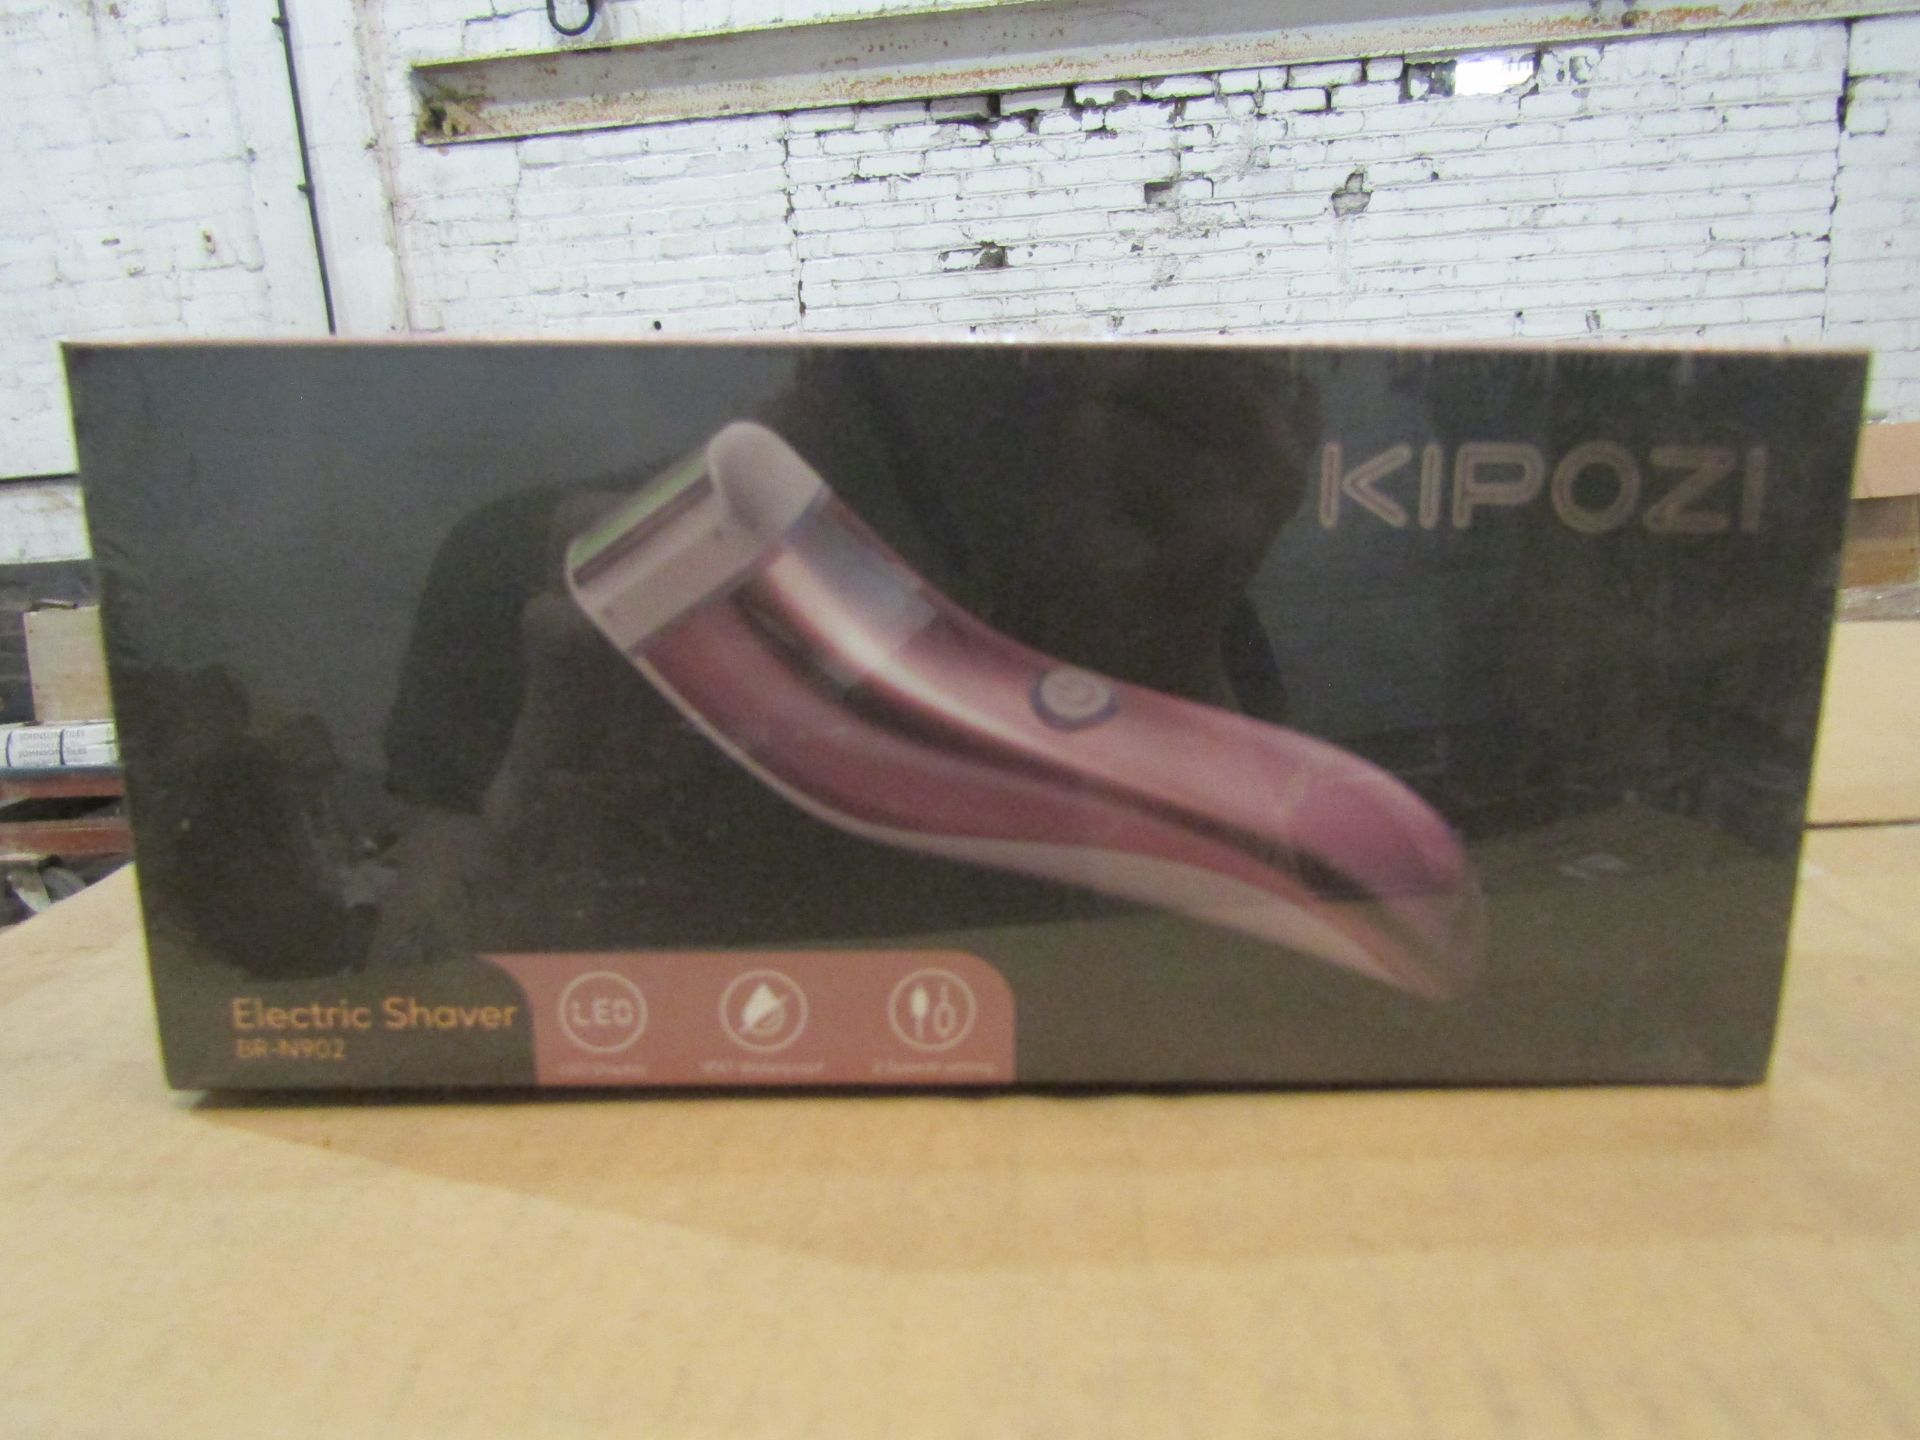 Kipozi Electric Shaver With LED Display, Waterproof, 2 Speed Settings, Model: BR-N902 - Good